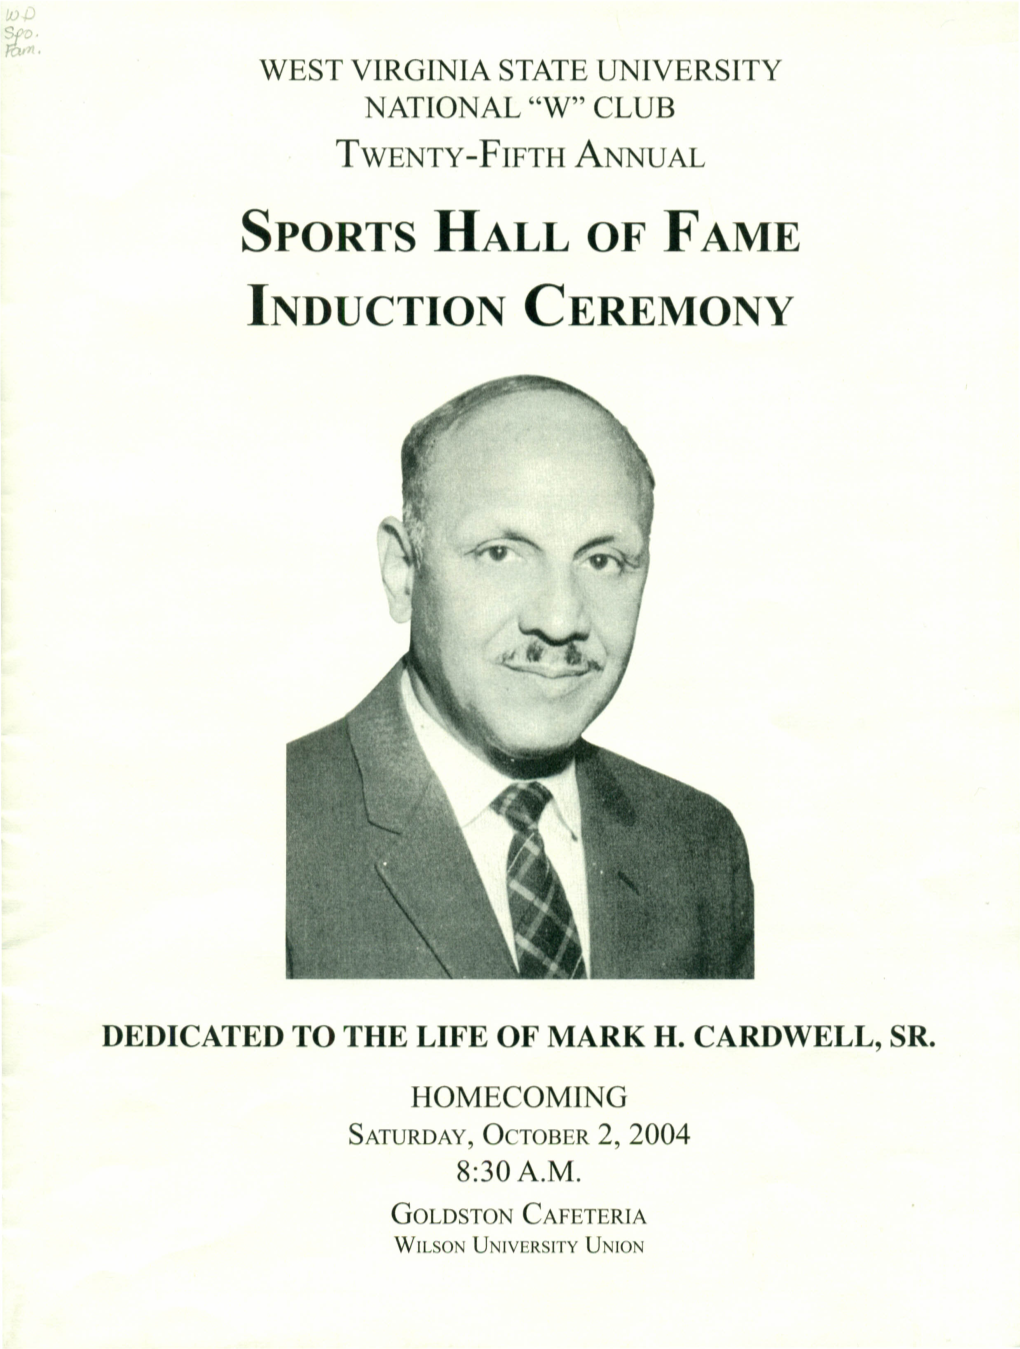 Sports Hall of Fame Induction Ceremony